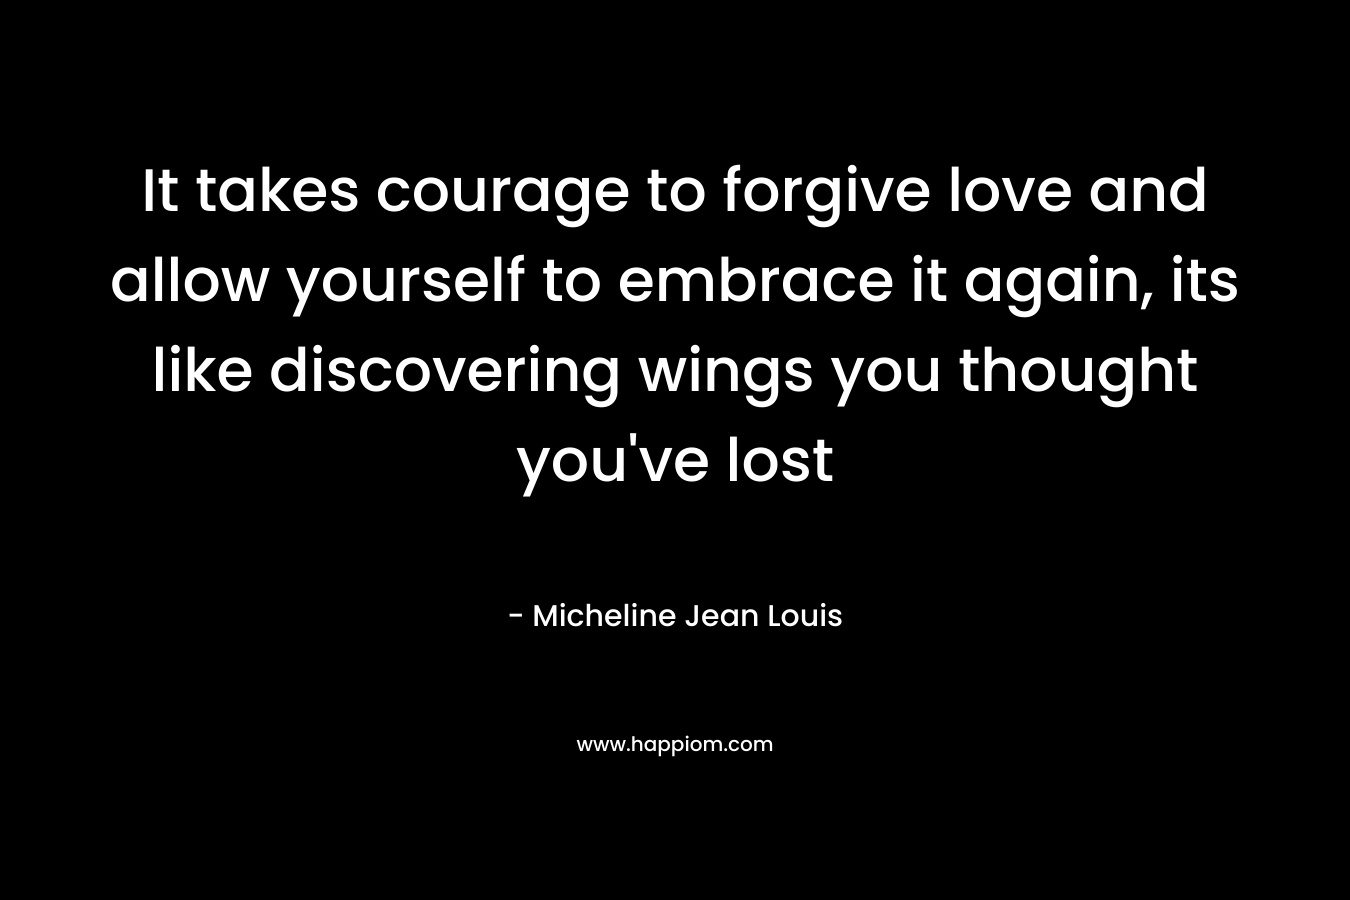 It takes courage to forgive love and allow yourself to embrace it again, its like discovering wings you thought you’ve lost – Micheline Jean Louis